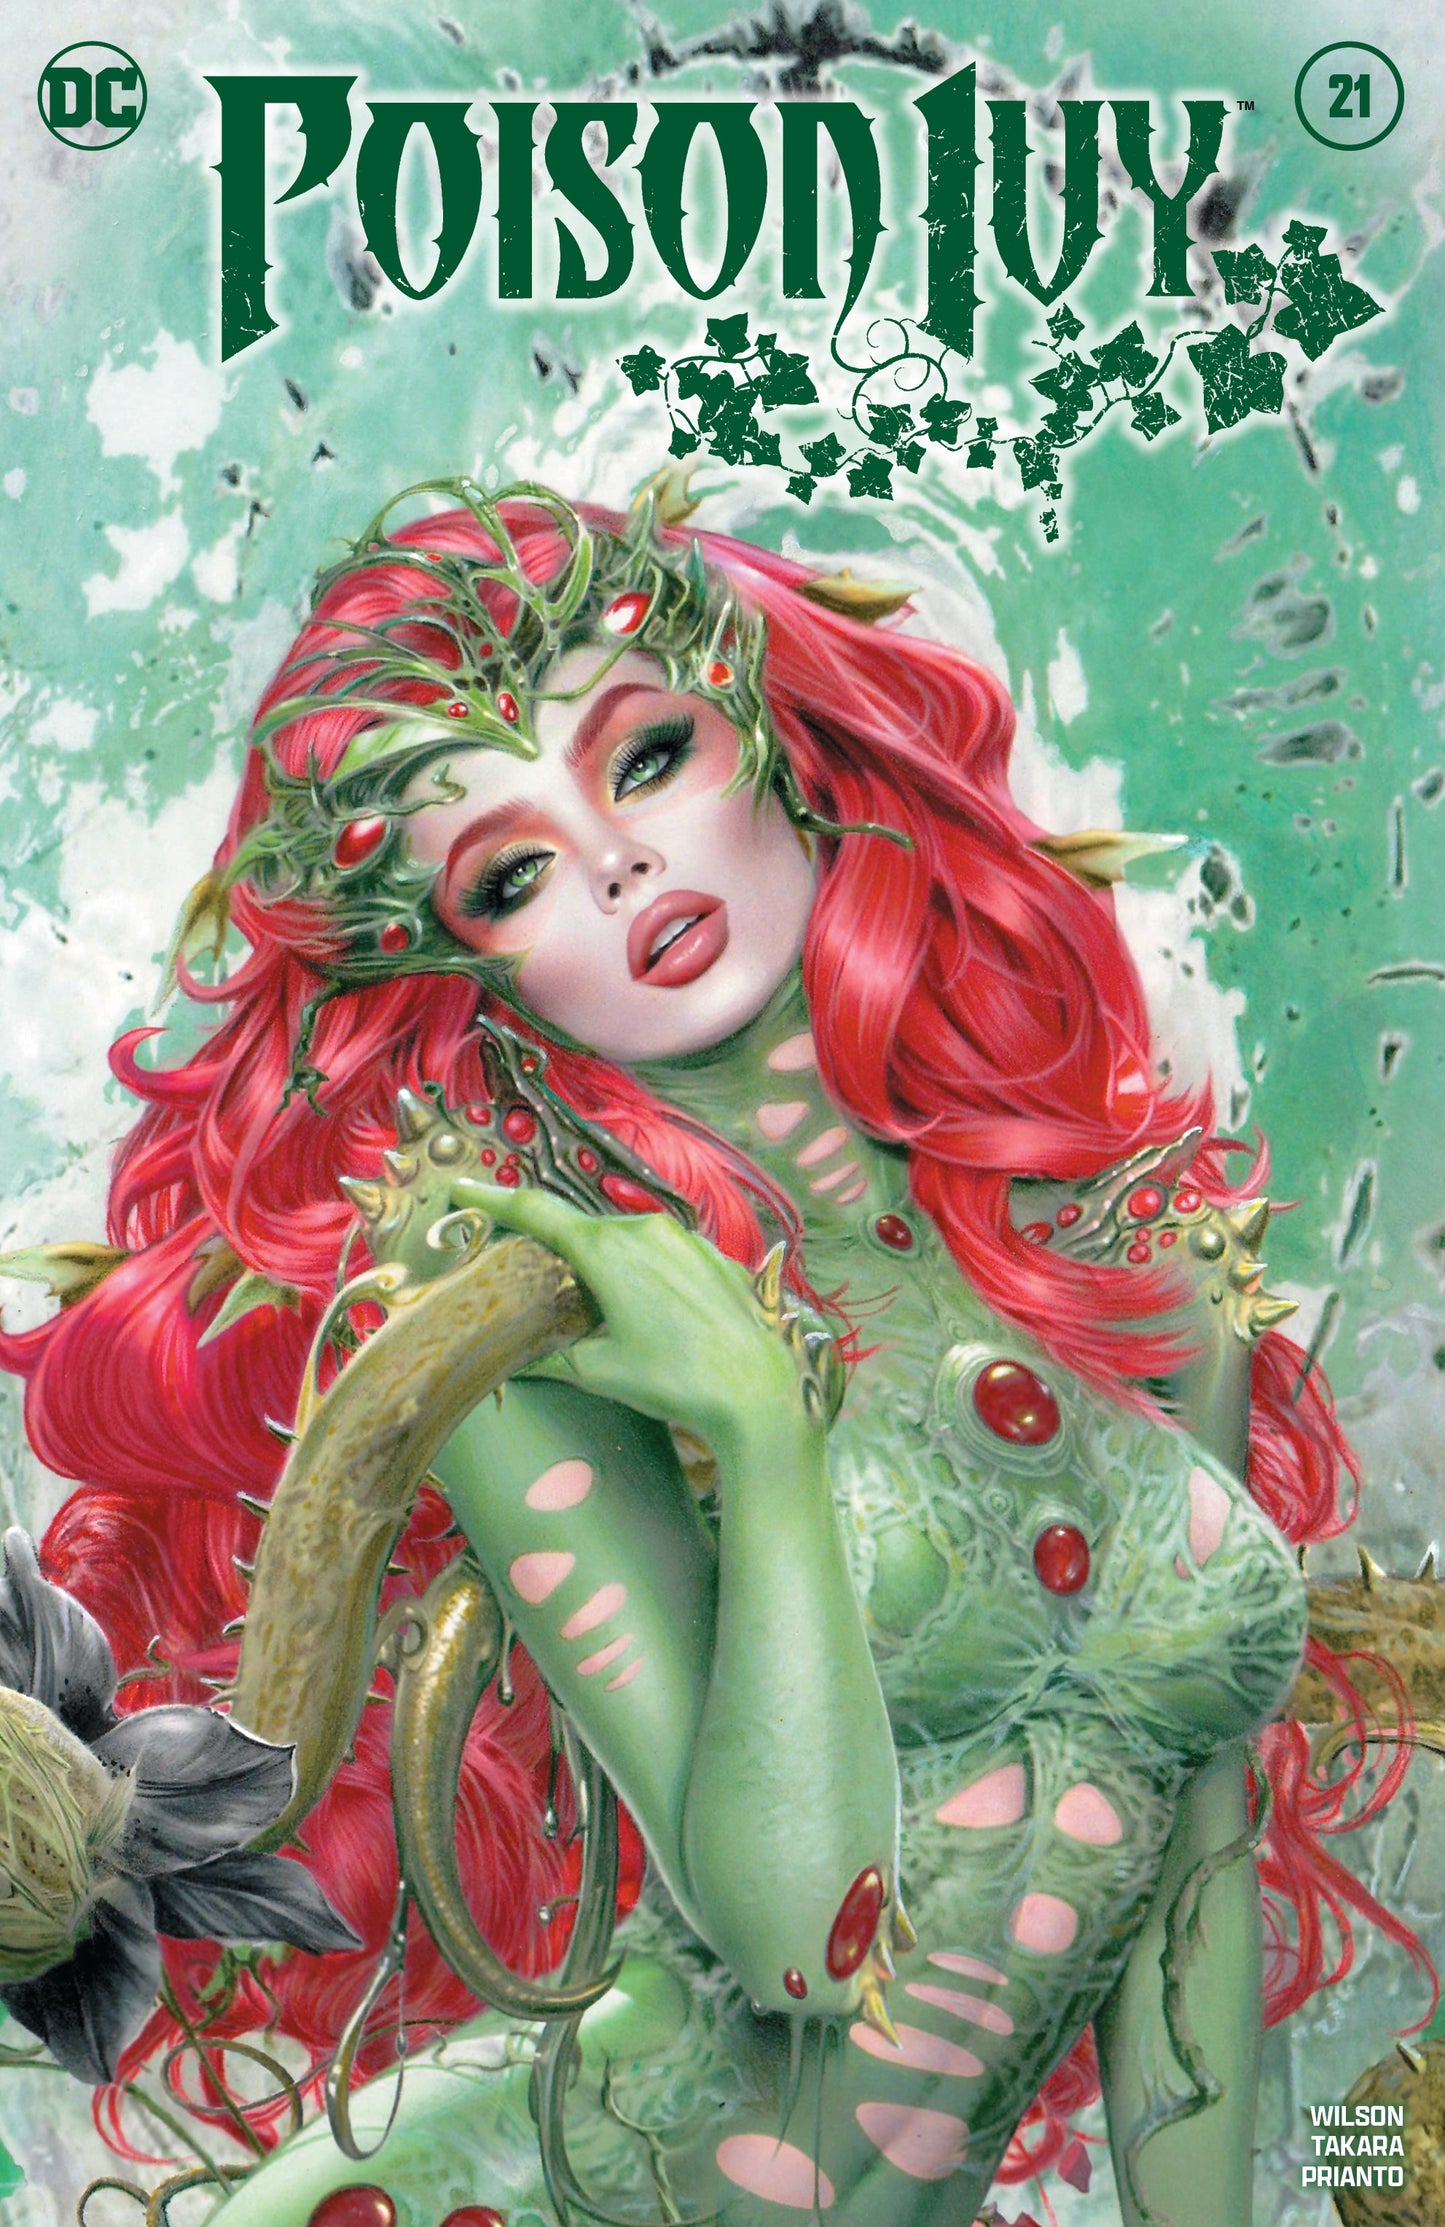 POISON IVY #21 NATALI SANDERS TRADE DRESS VARIANT LIMITED TO 3000 COPIES